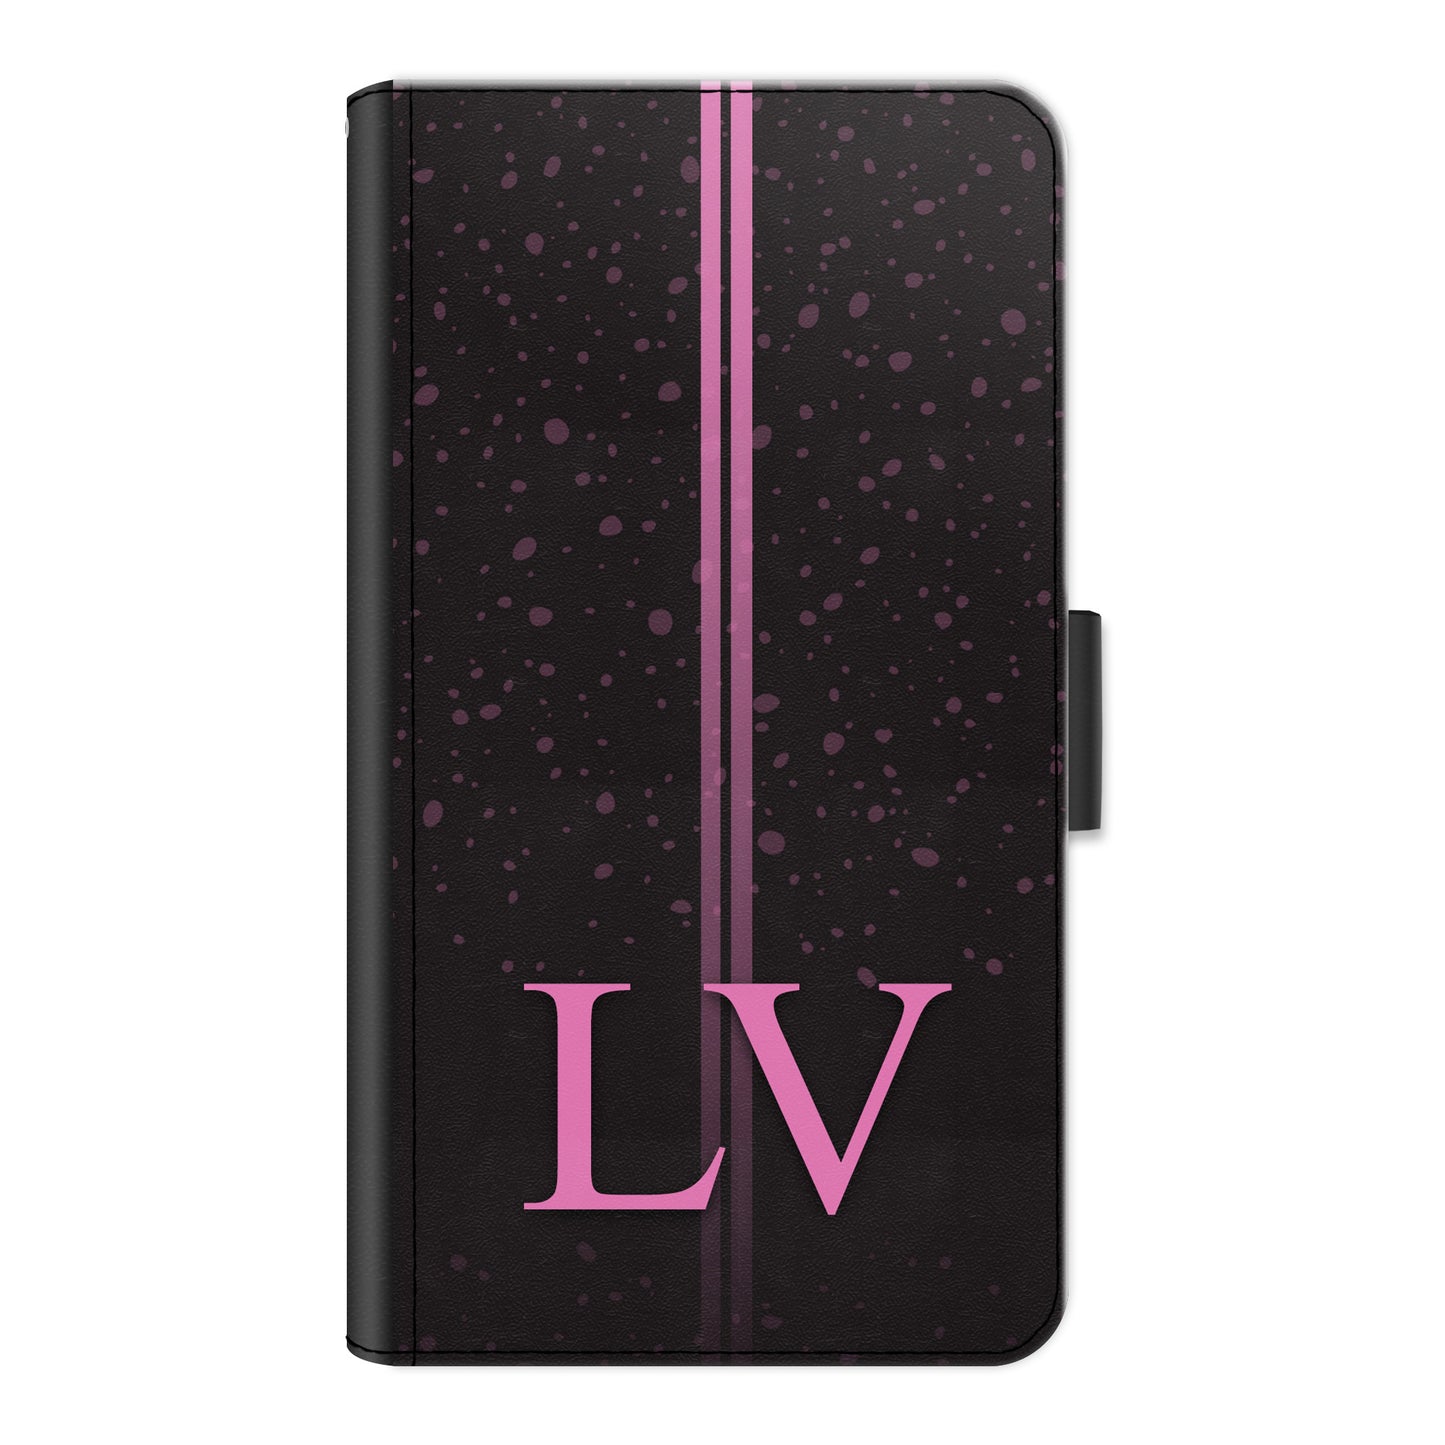 Personalised Sony Phone Leather Wallet with Pink Initials, Pin Stripes and Droplets on Black